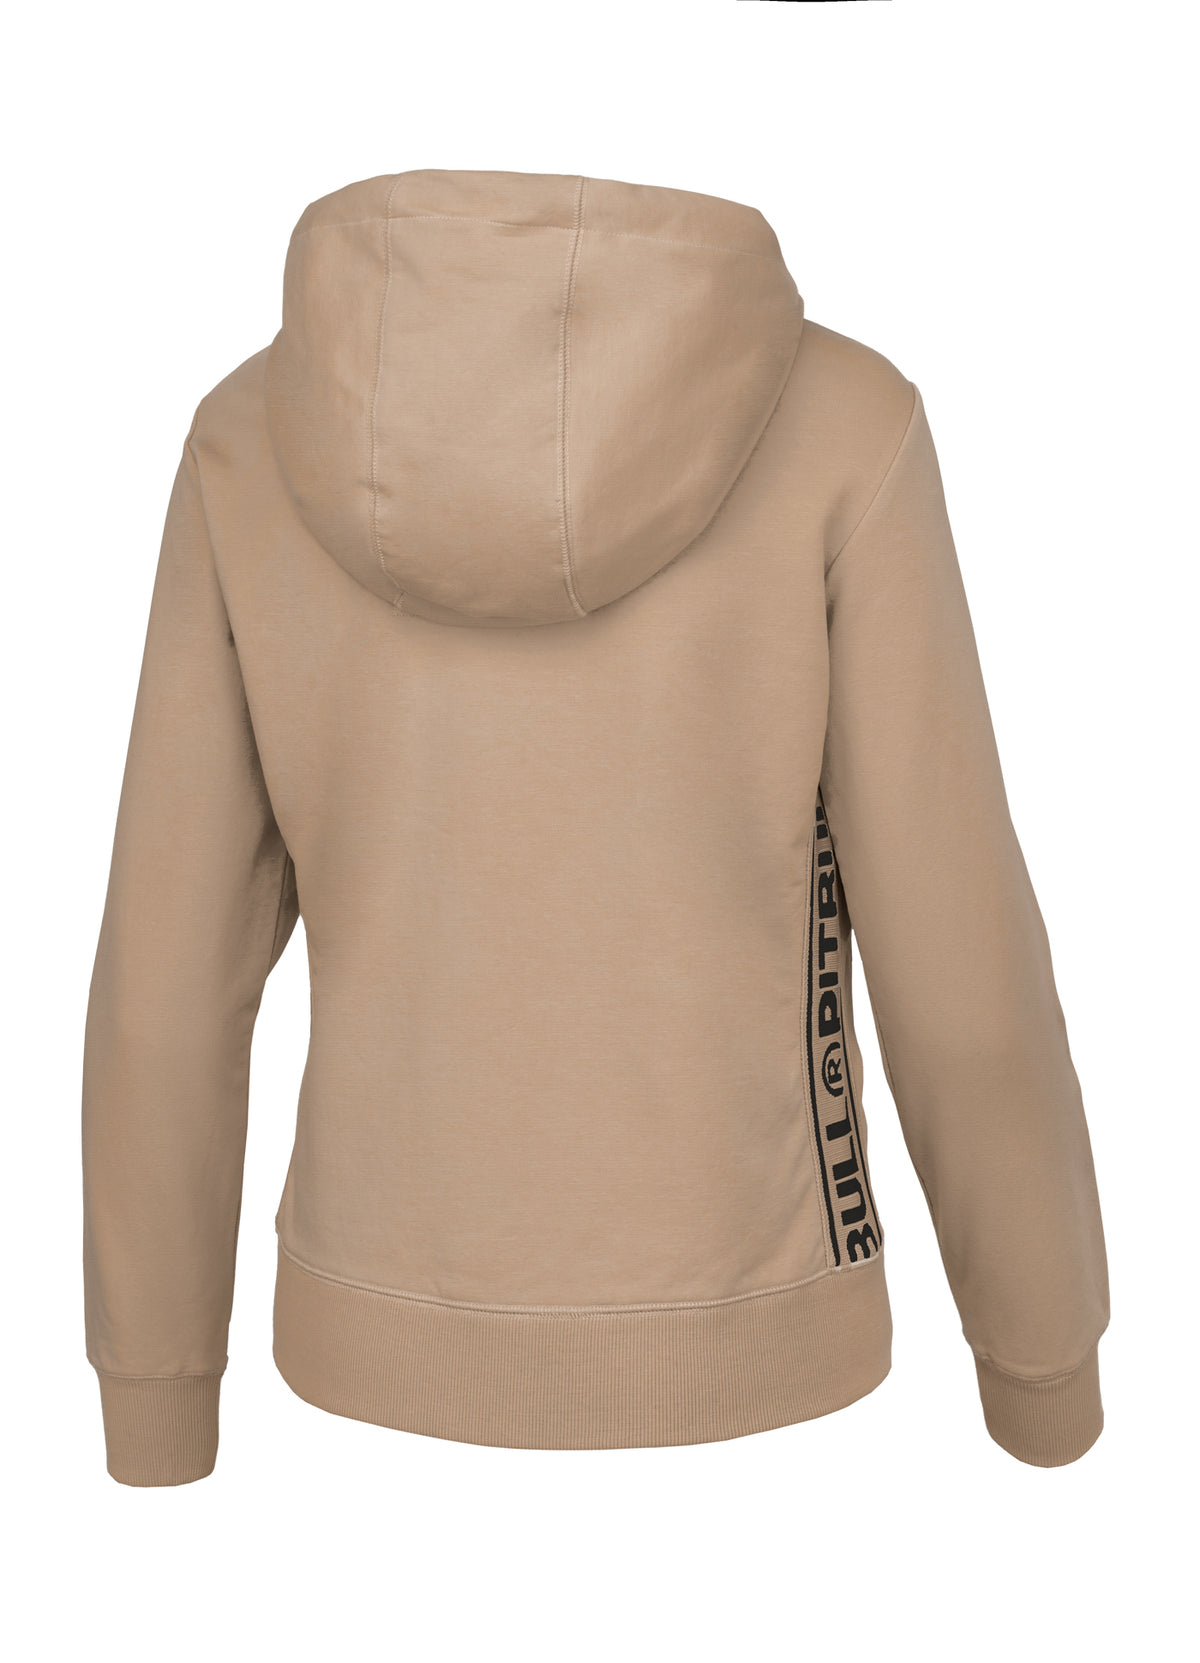 LA CANADA French Terry Sand Hoodie